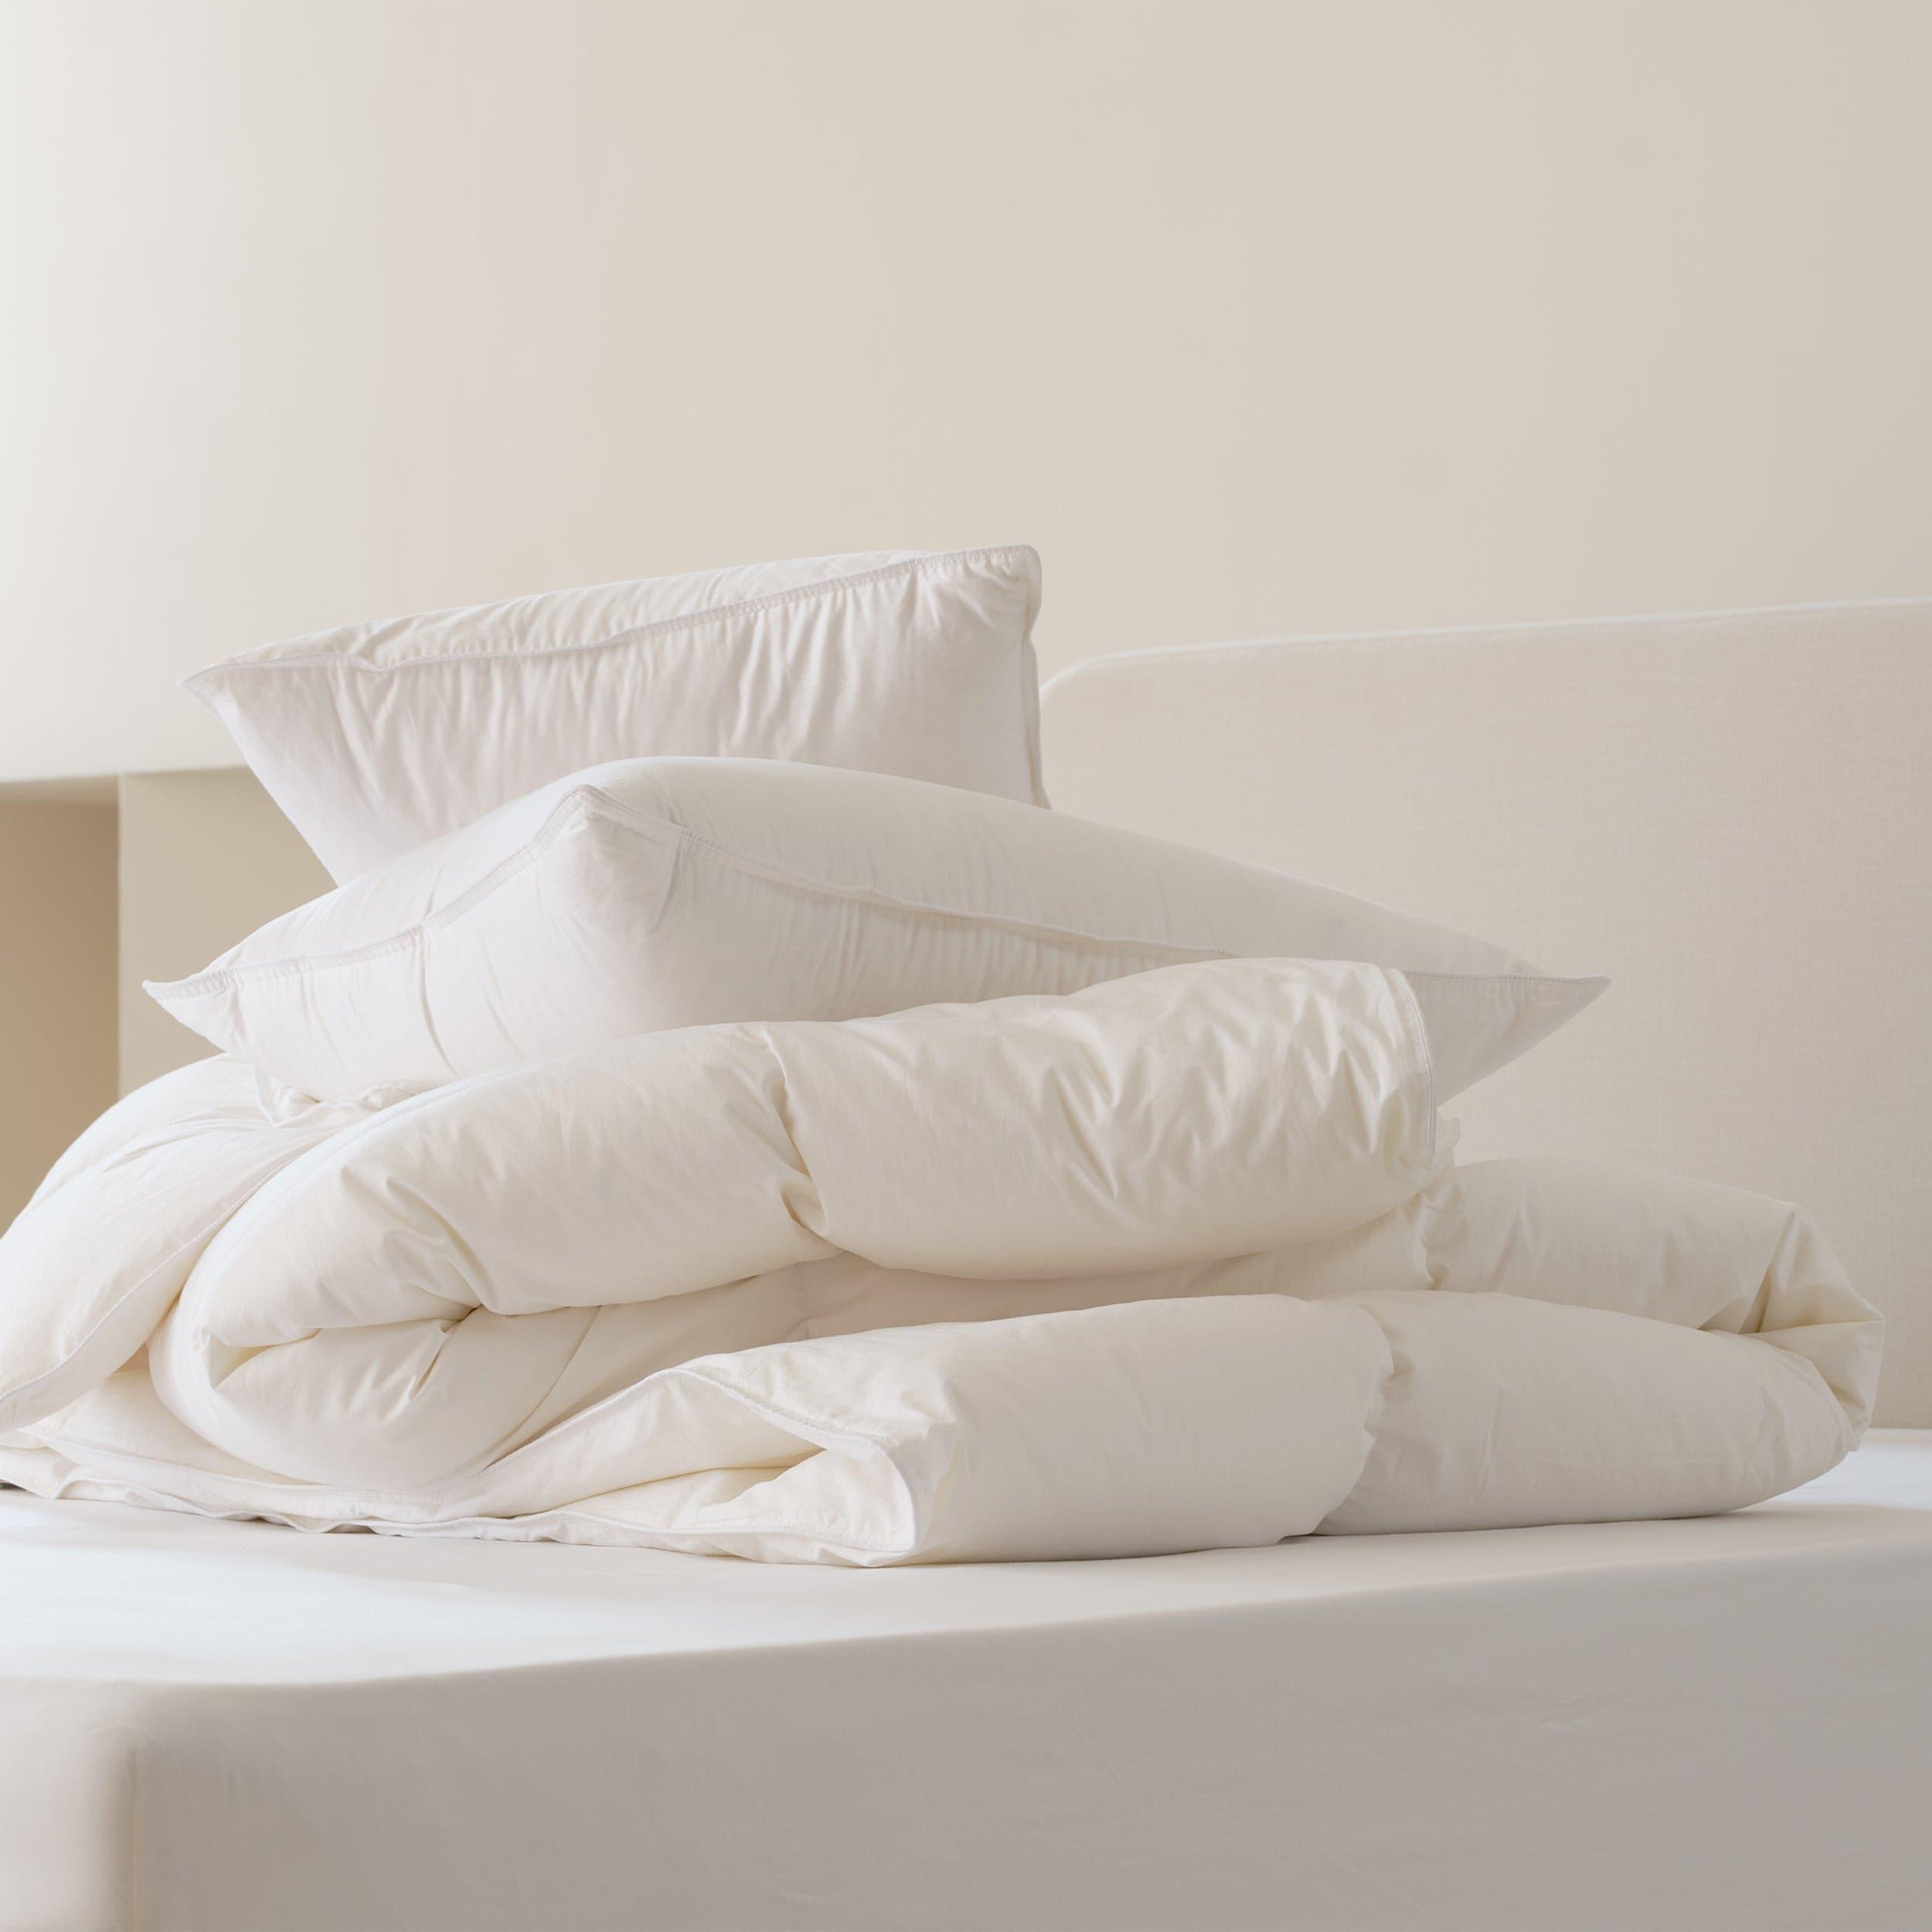 Experience the ultimate comfort and warmth with our premium queen duvet insert.